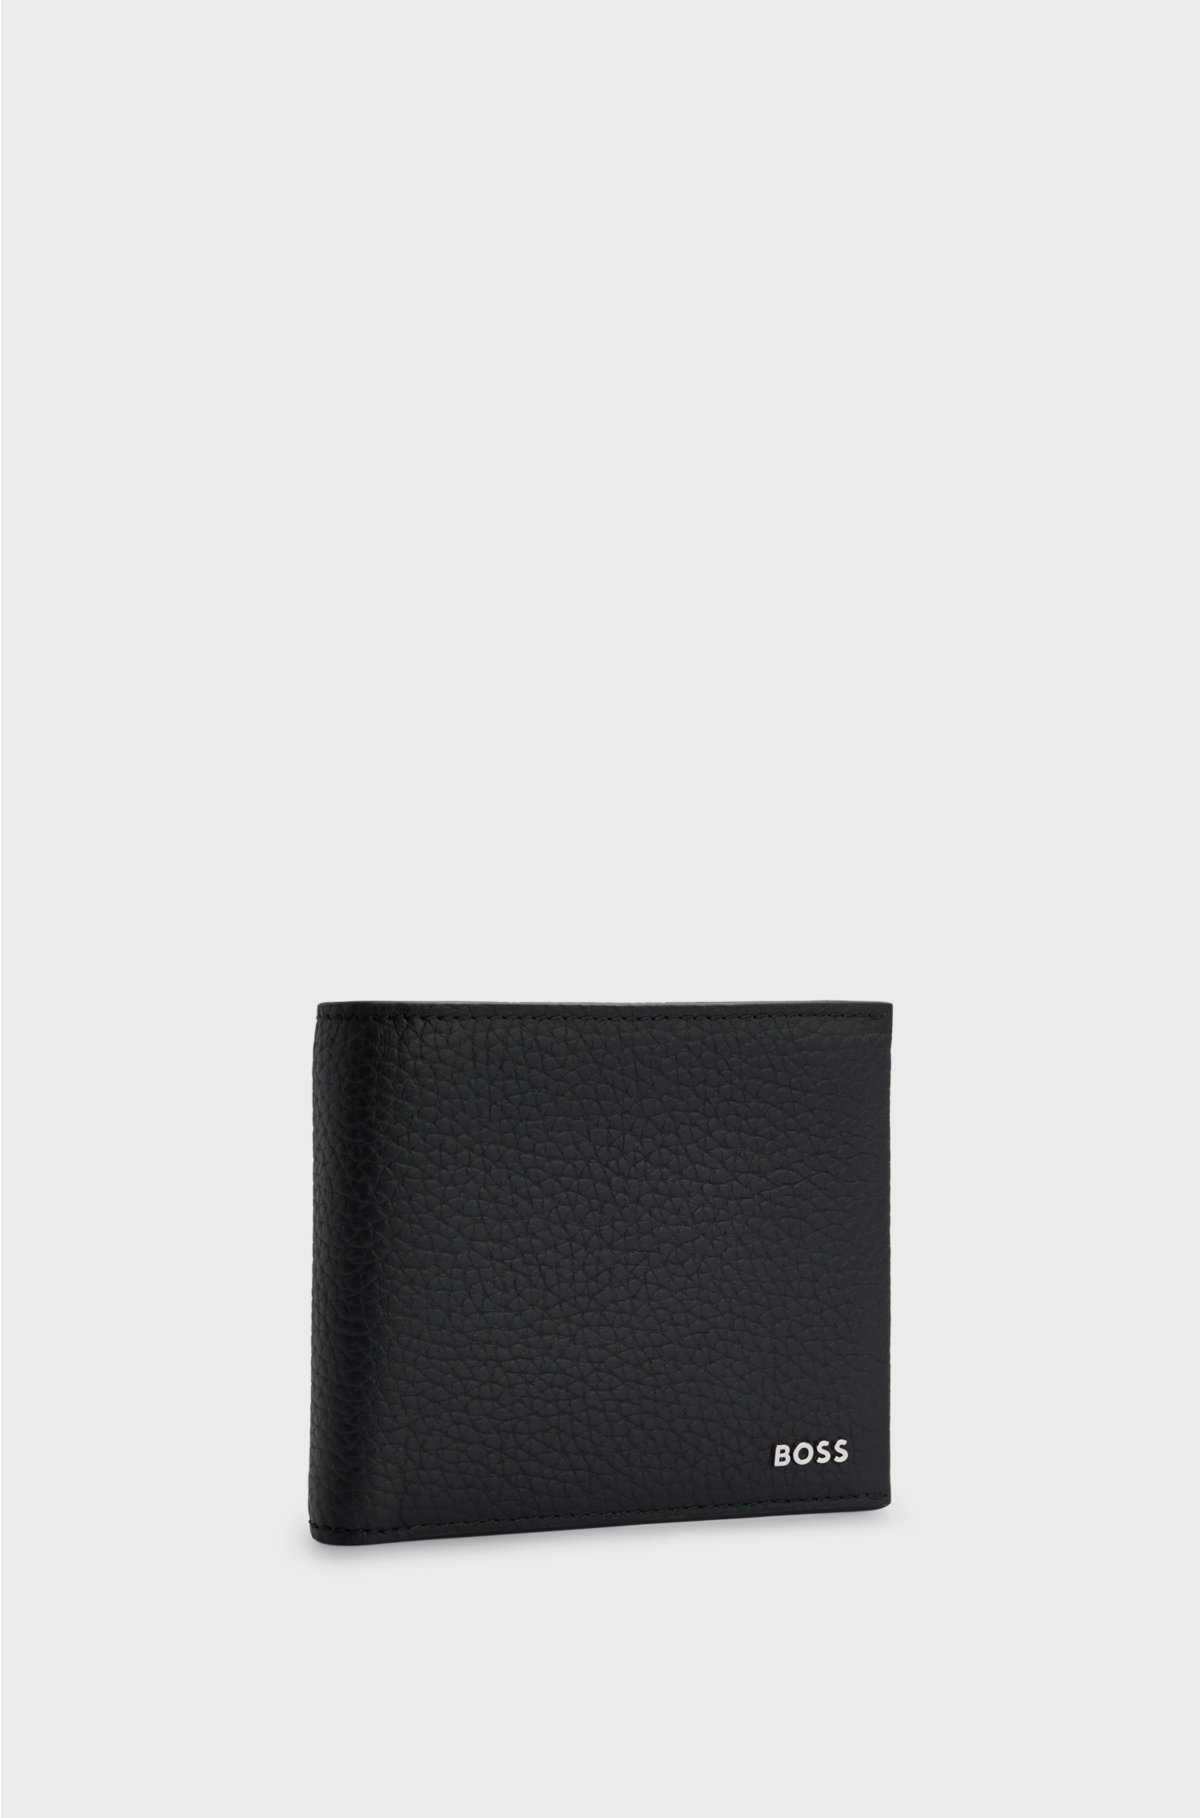 Italian-leather wallet with polished-silver logo, Black